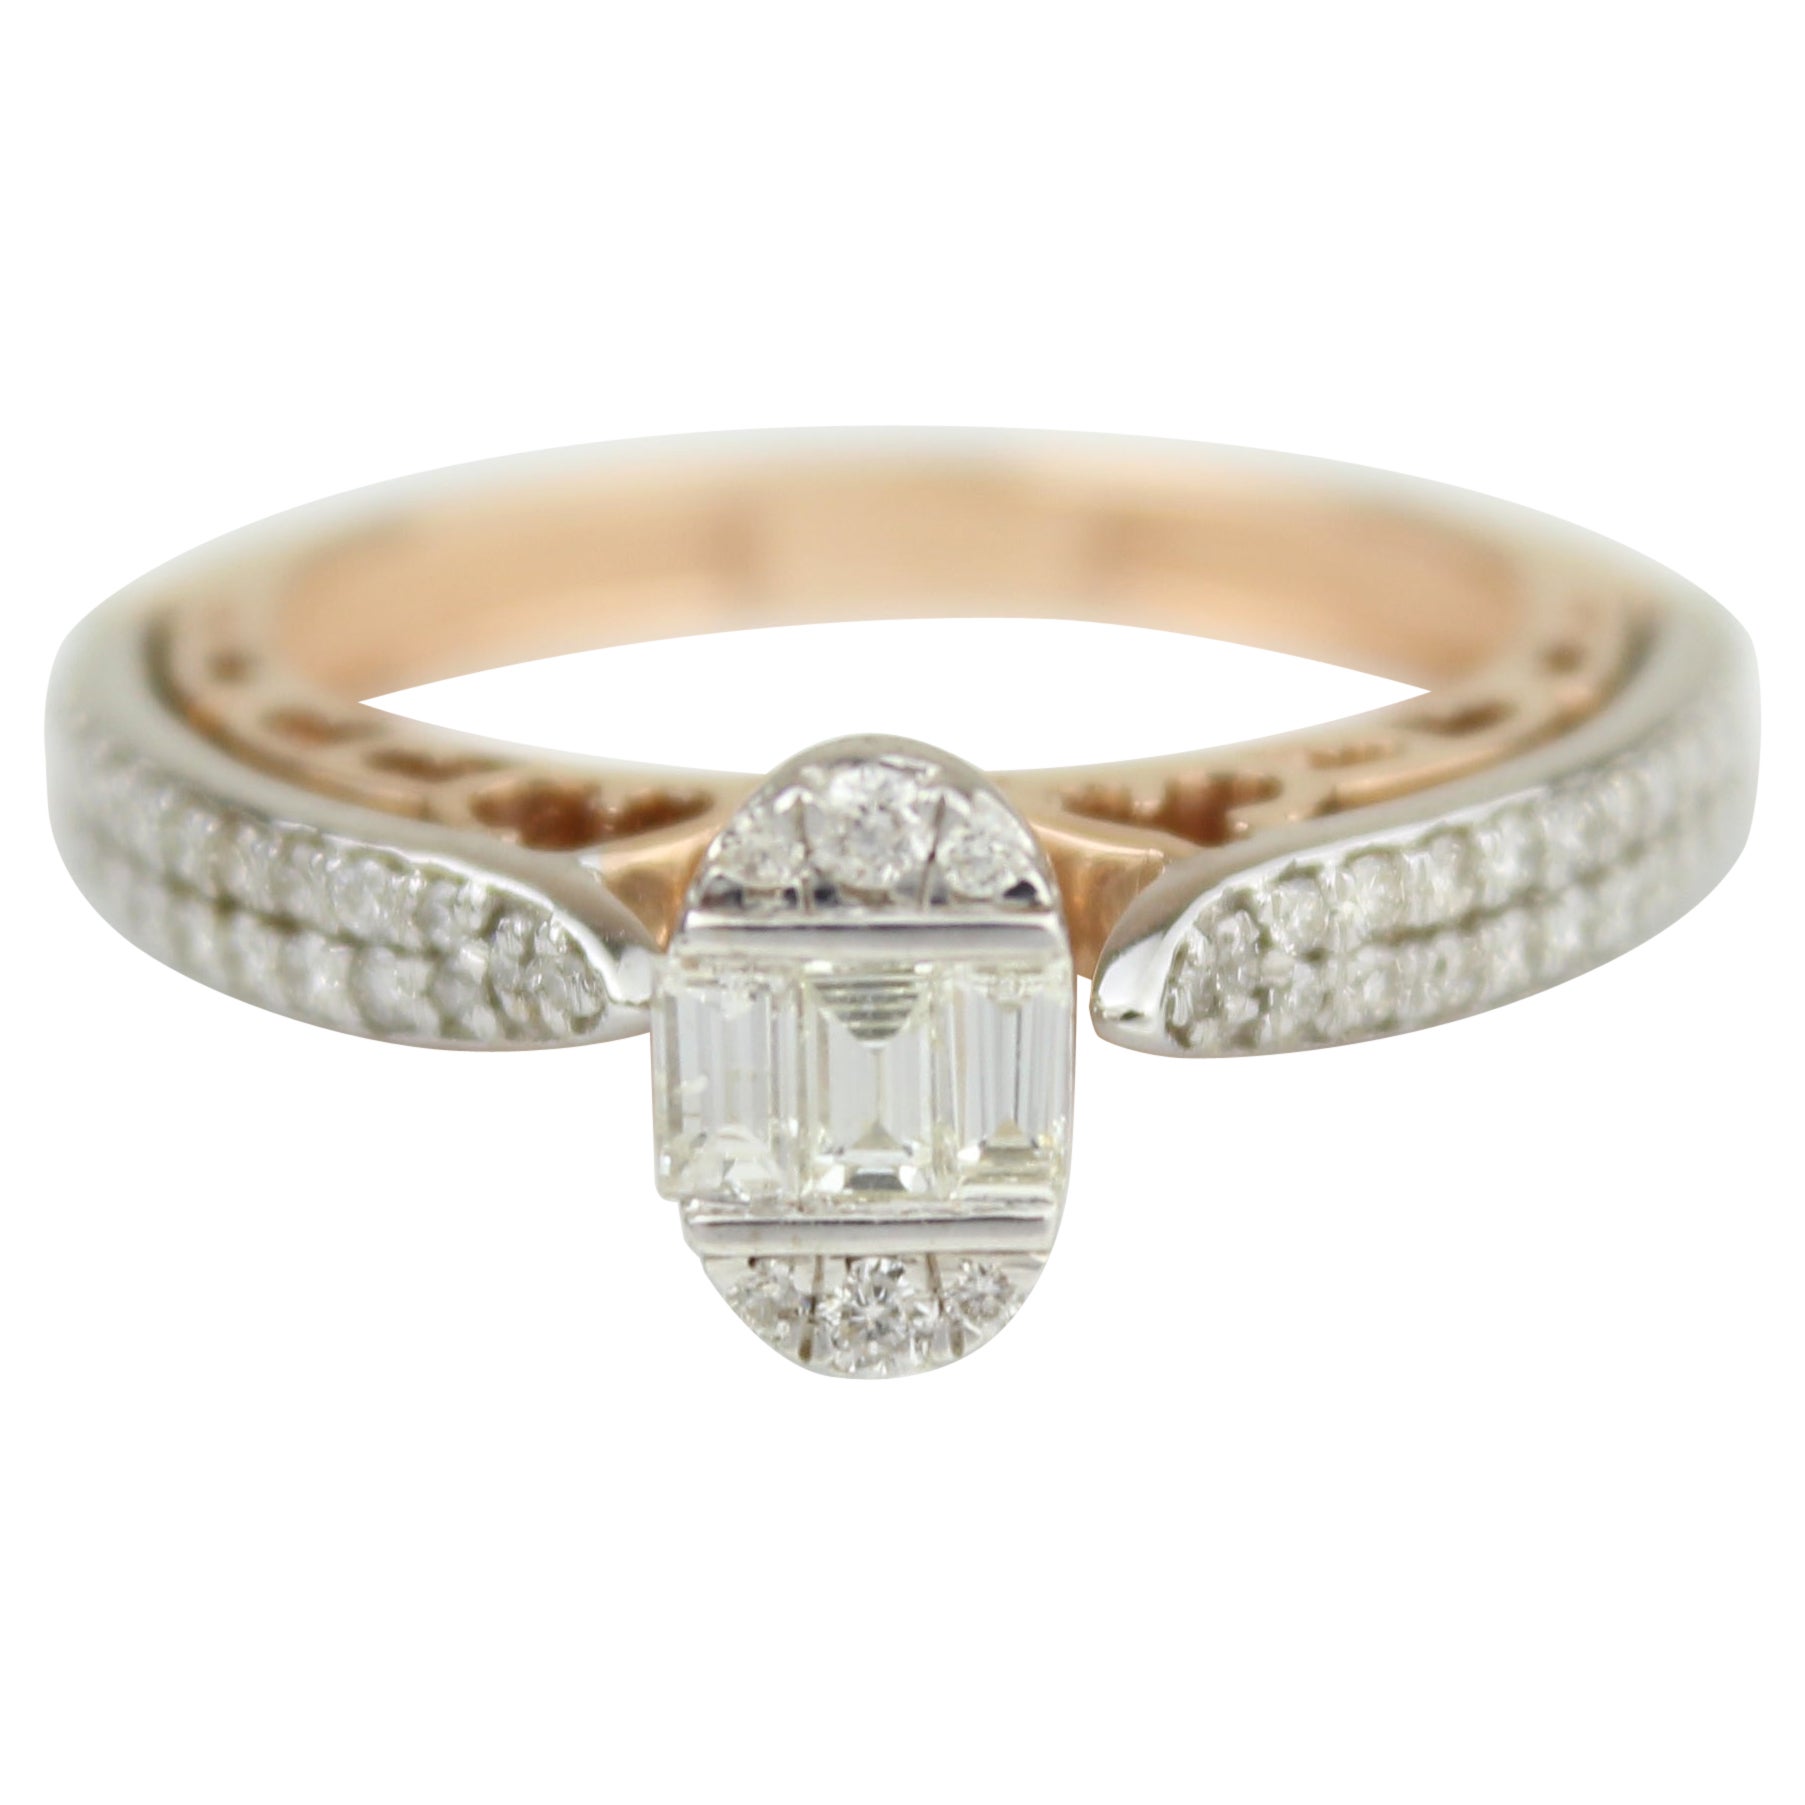 Oval Design Diamond Ring With Illusion Setting in 18k Solid Gold